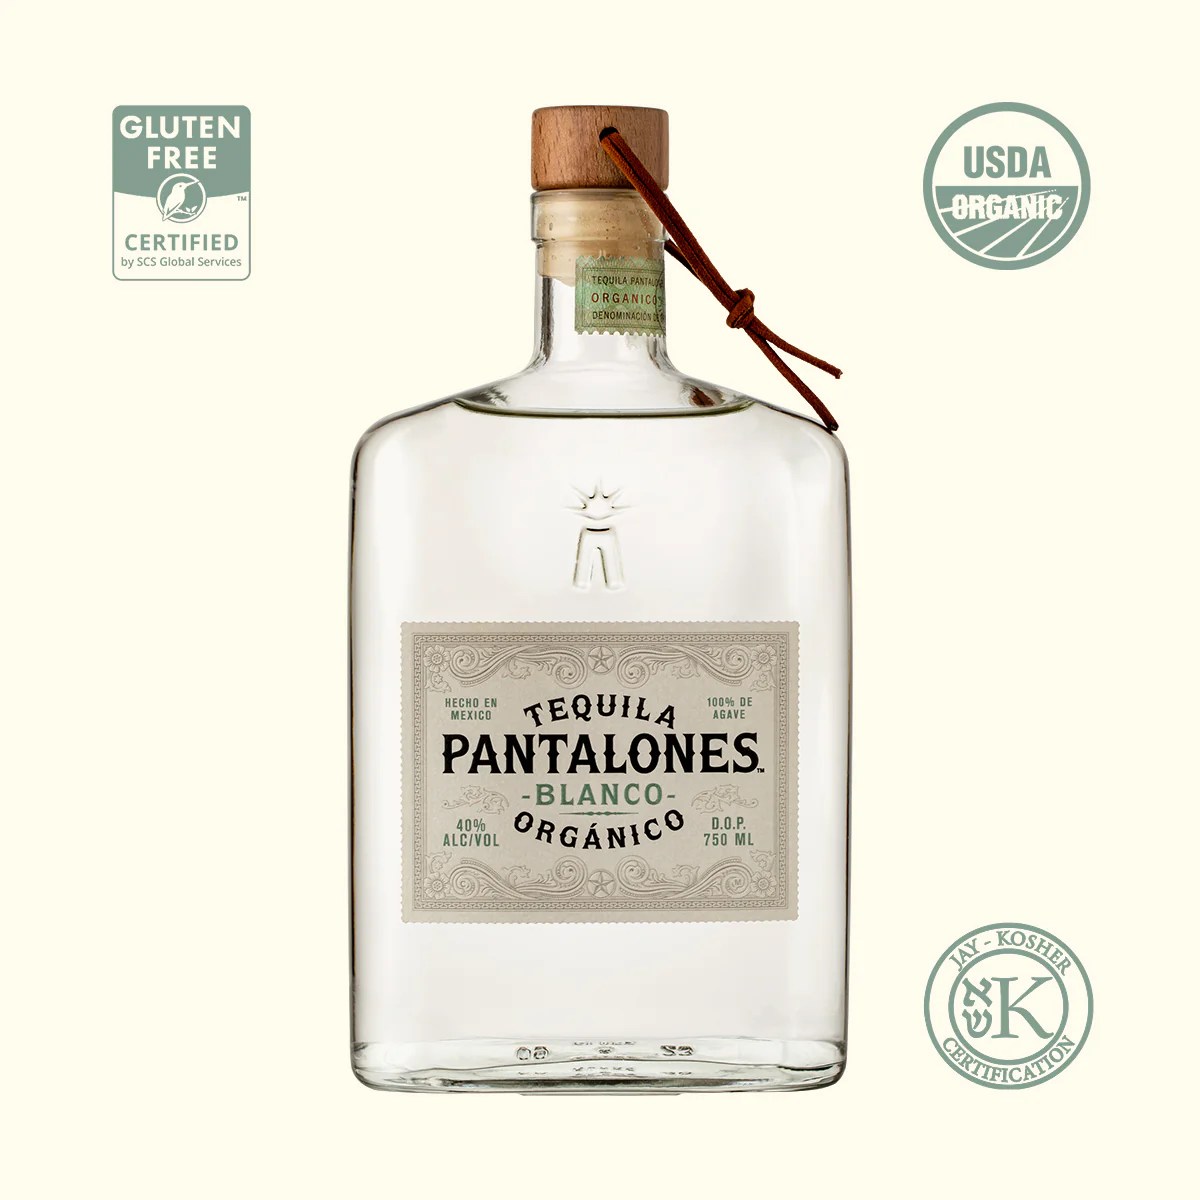 pantalones tequila, a great mother's day food gift